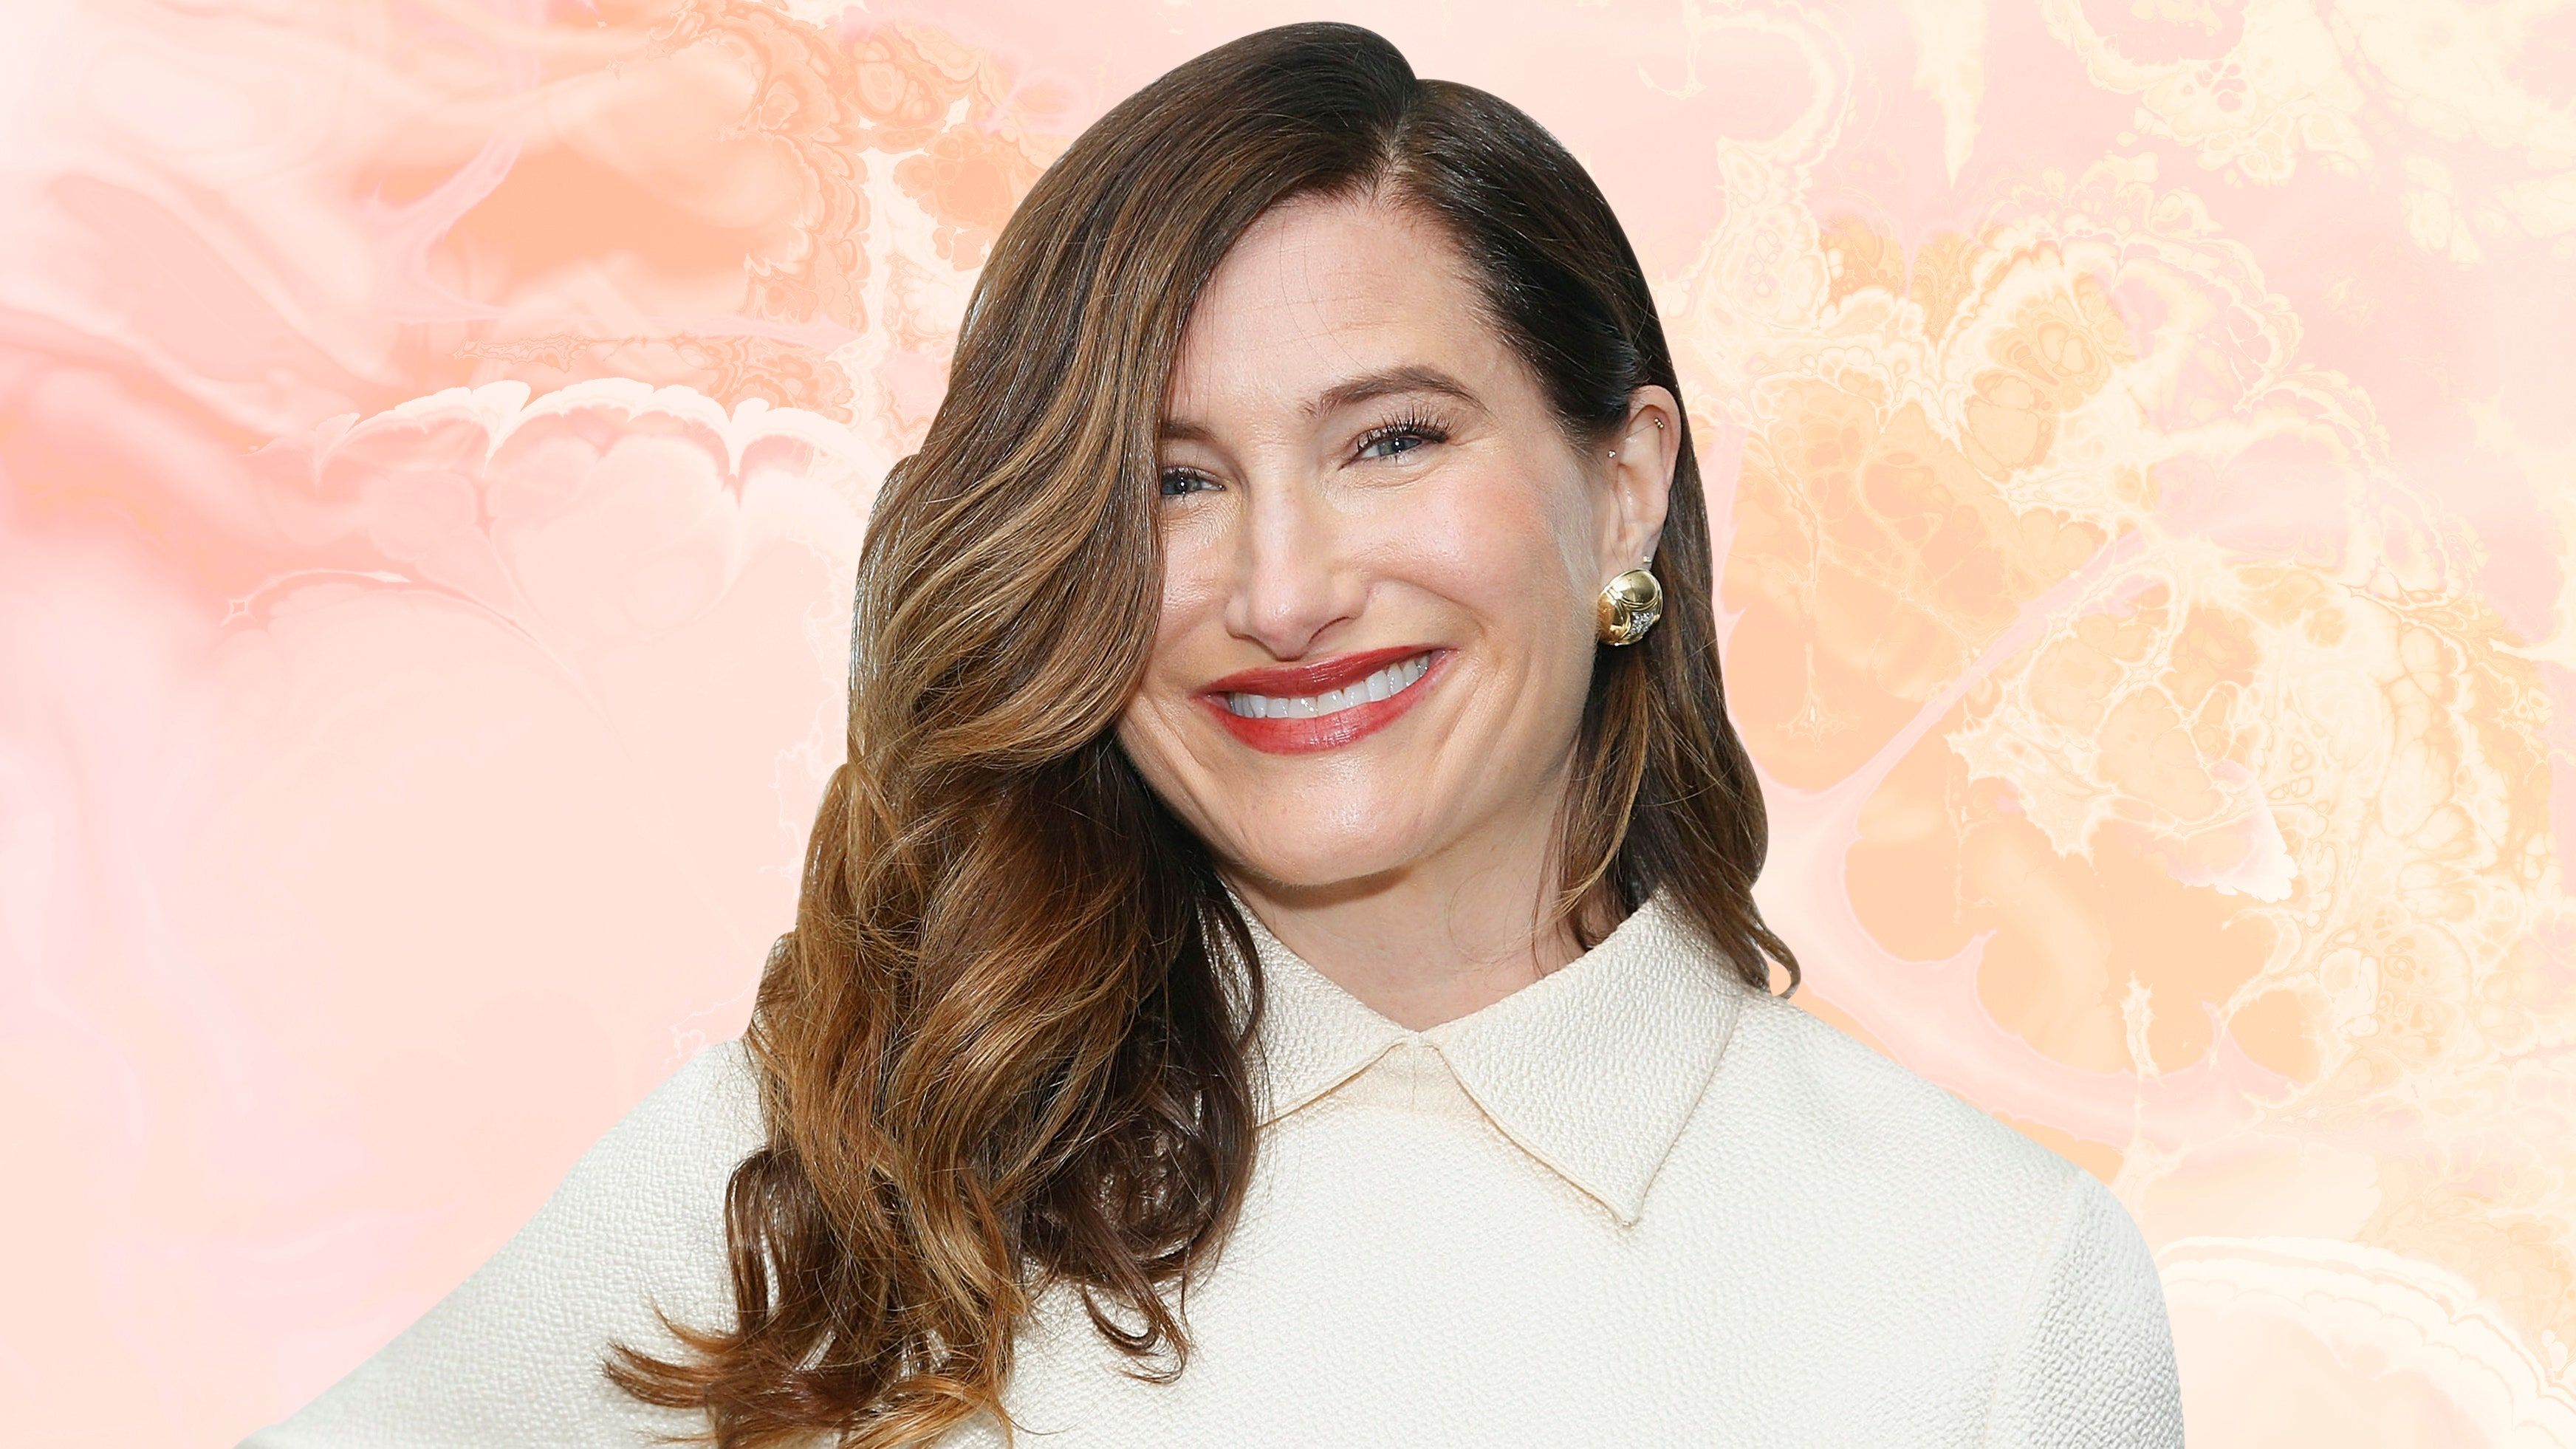 Wandavision Star Kathryn Hahn Reveals Hair And Skin Care Products And Routines